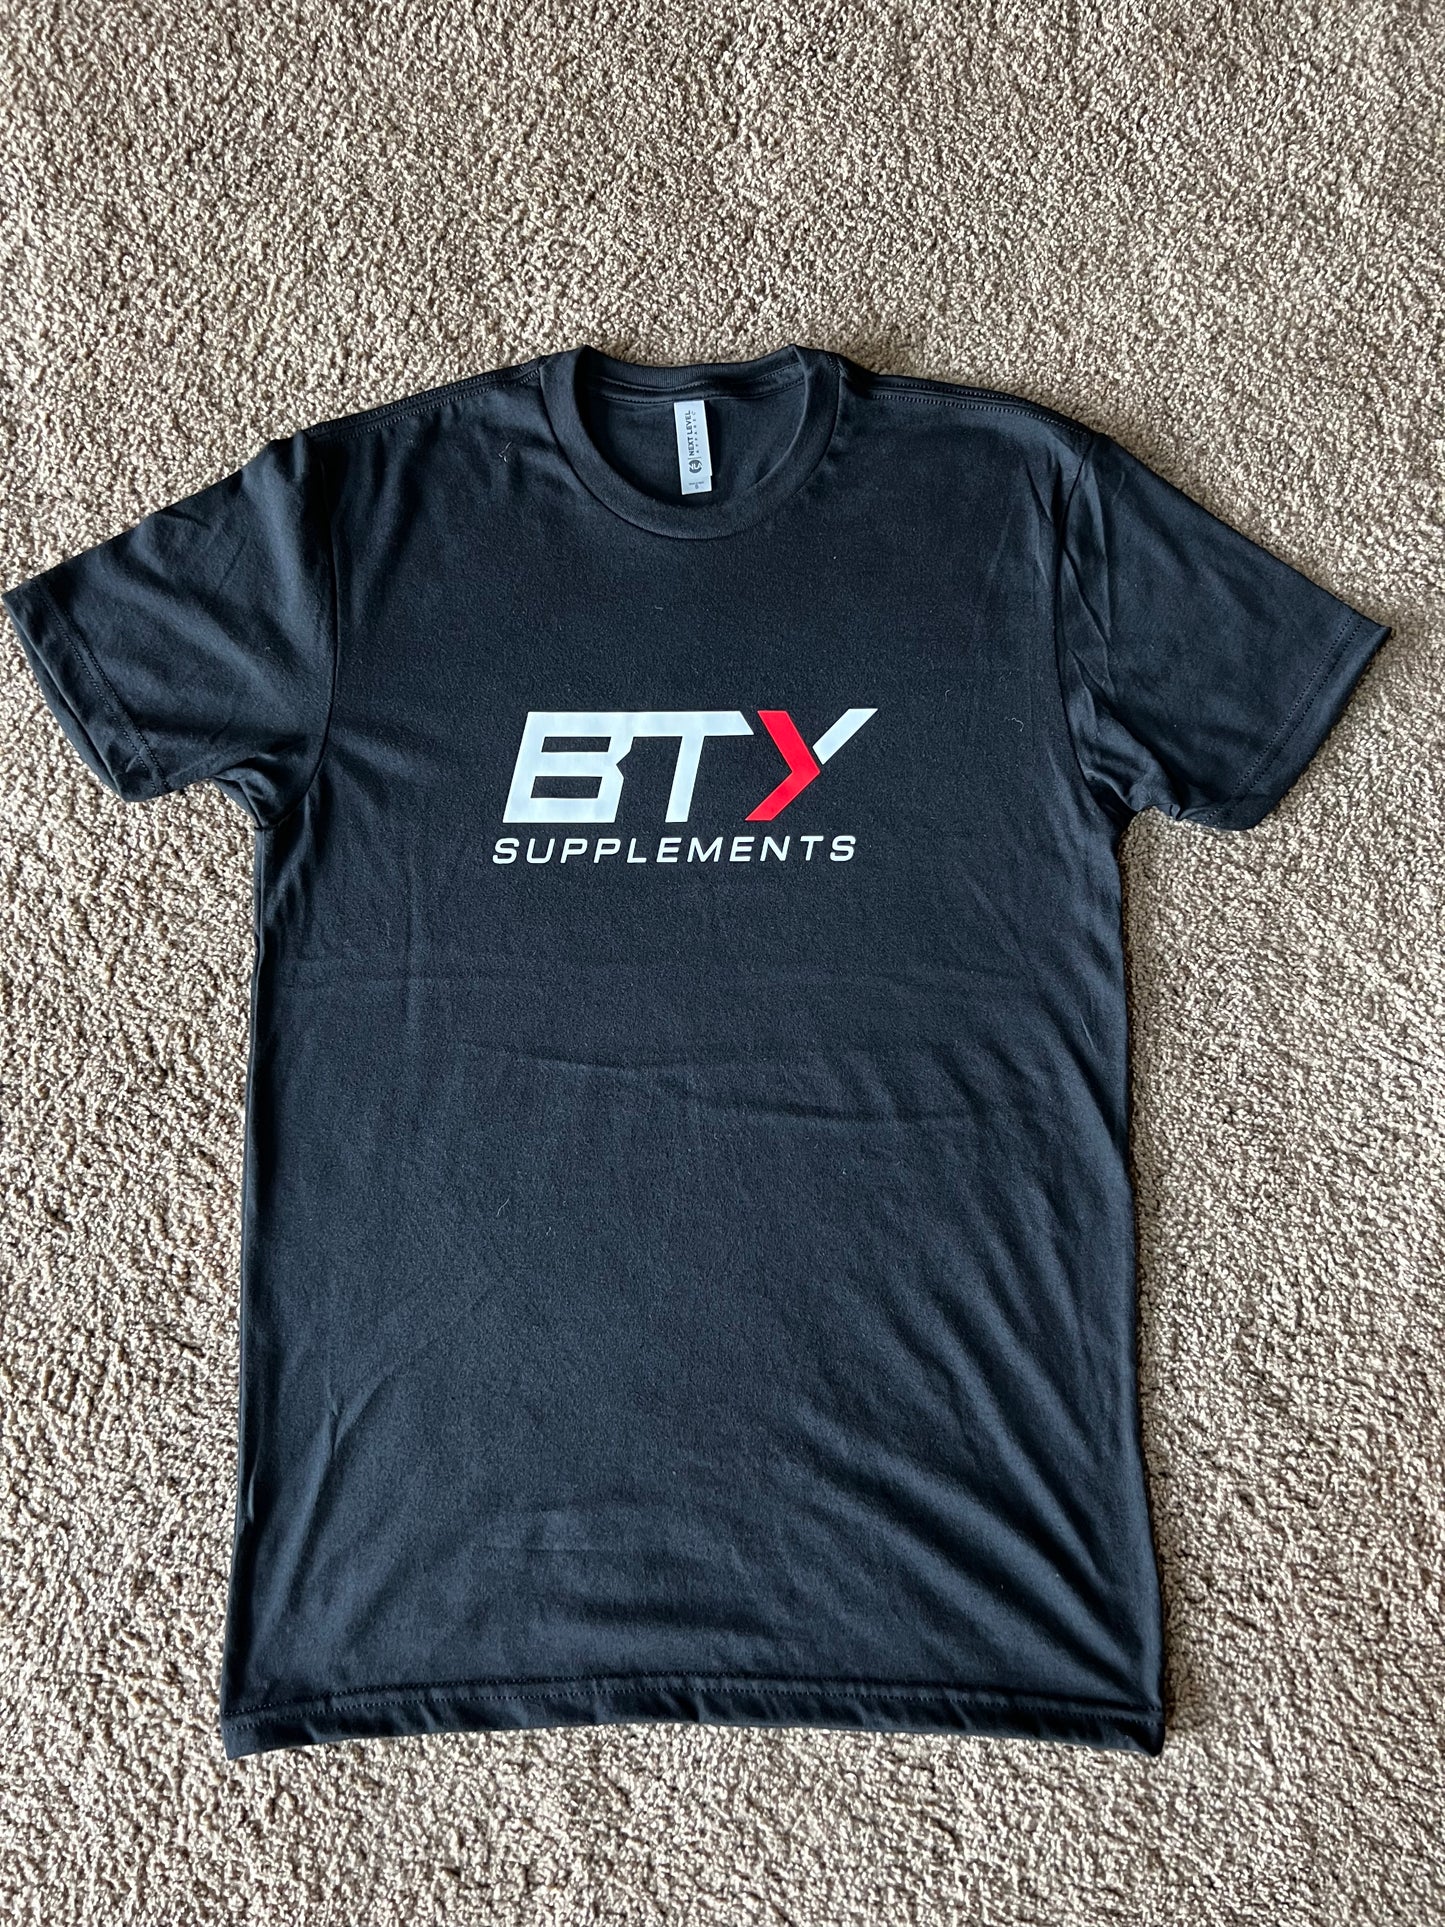 BTY T-Shirt